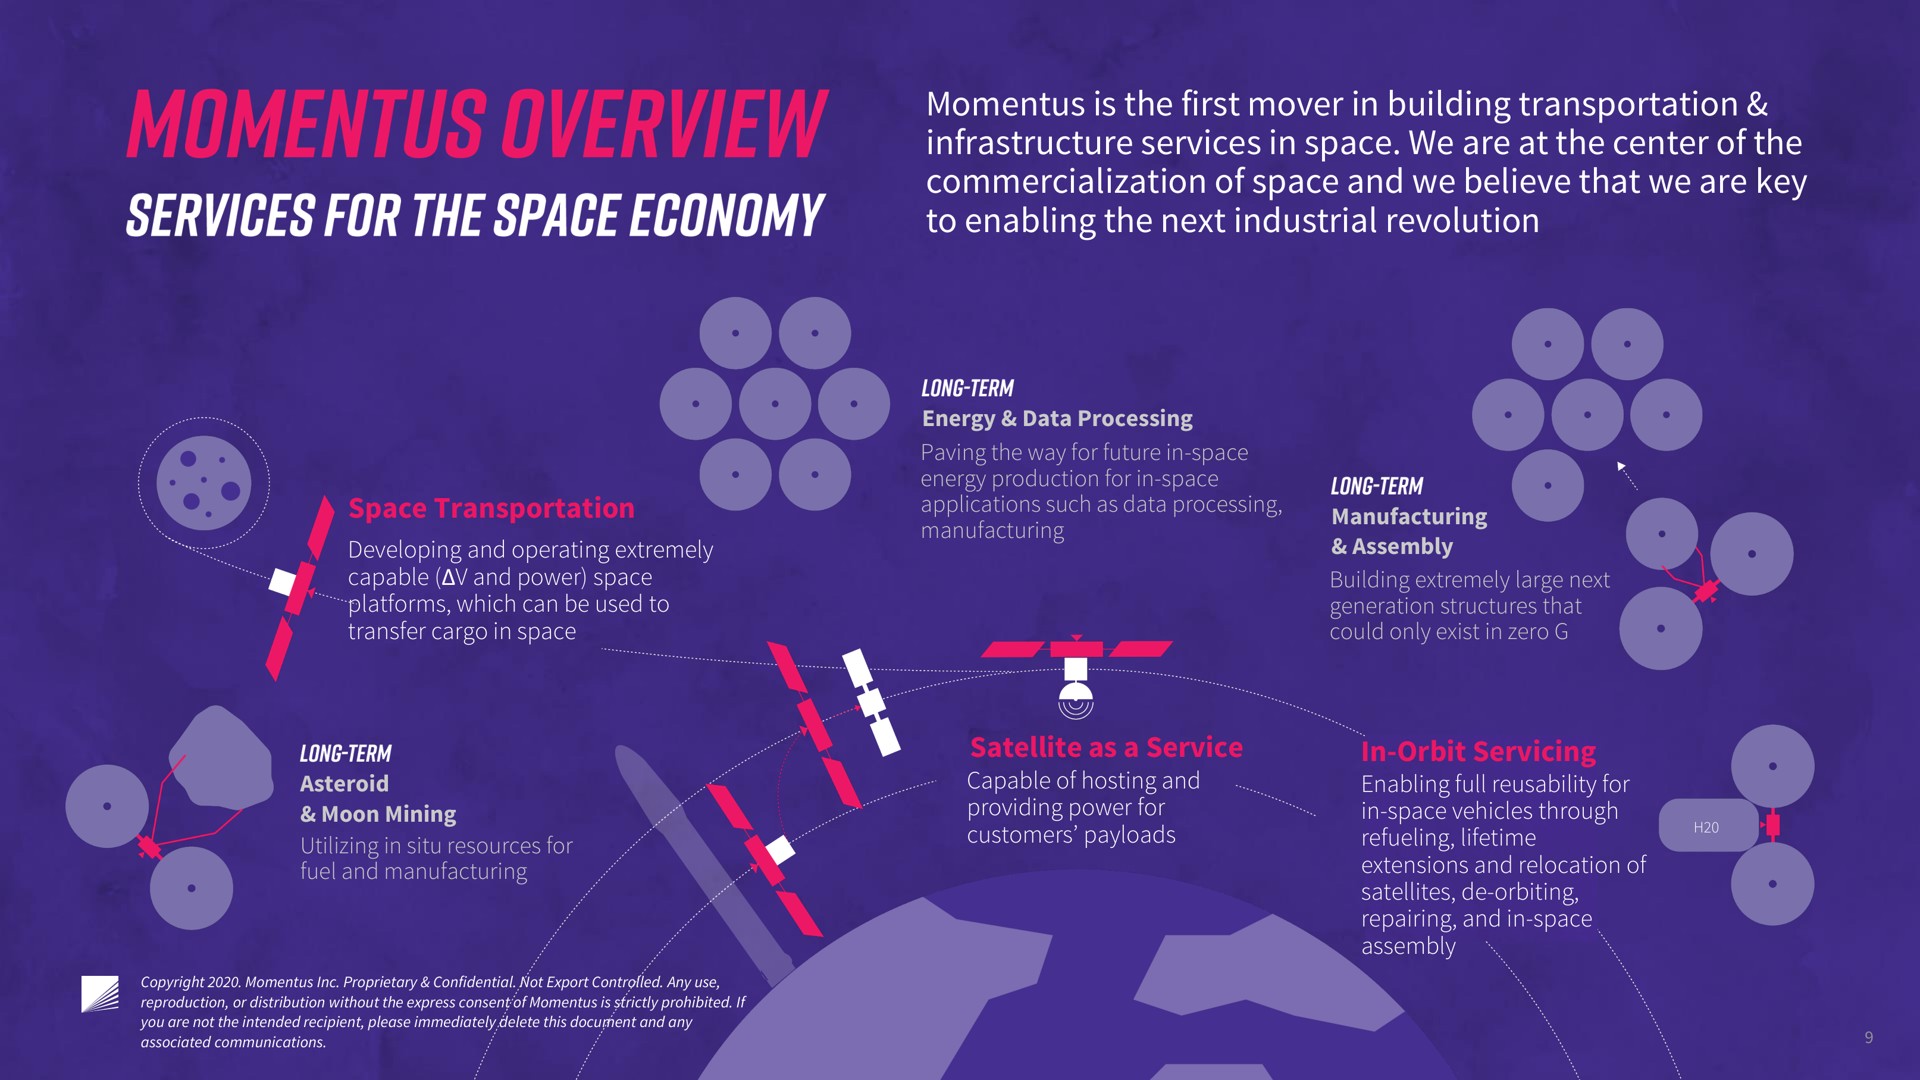 is the first mover in building transportation infrastructure services in space we are at the center of the commercialization of space and we believe that we are key to enabling the next industrial revolution | Momentus